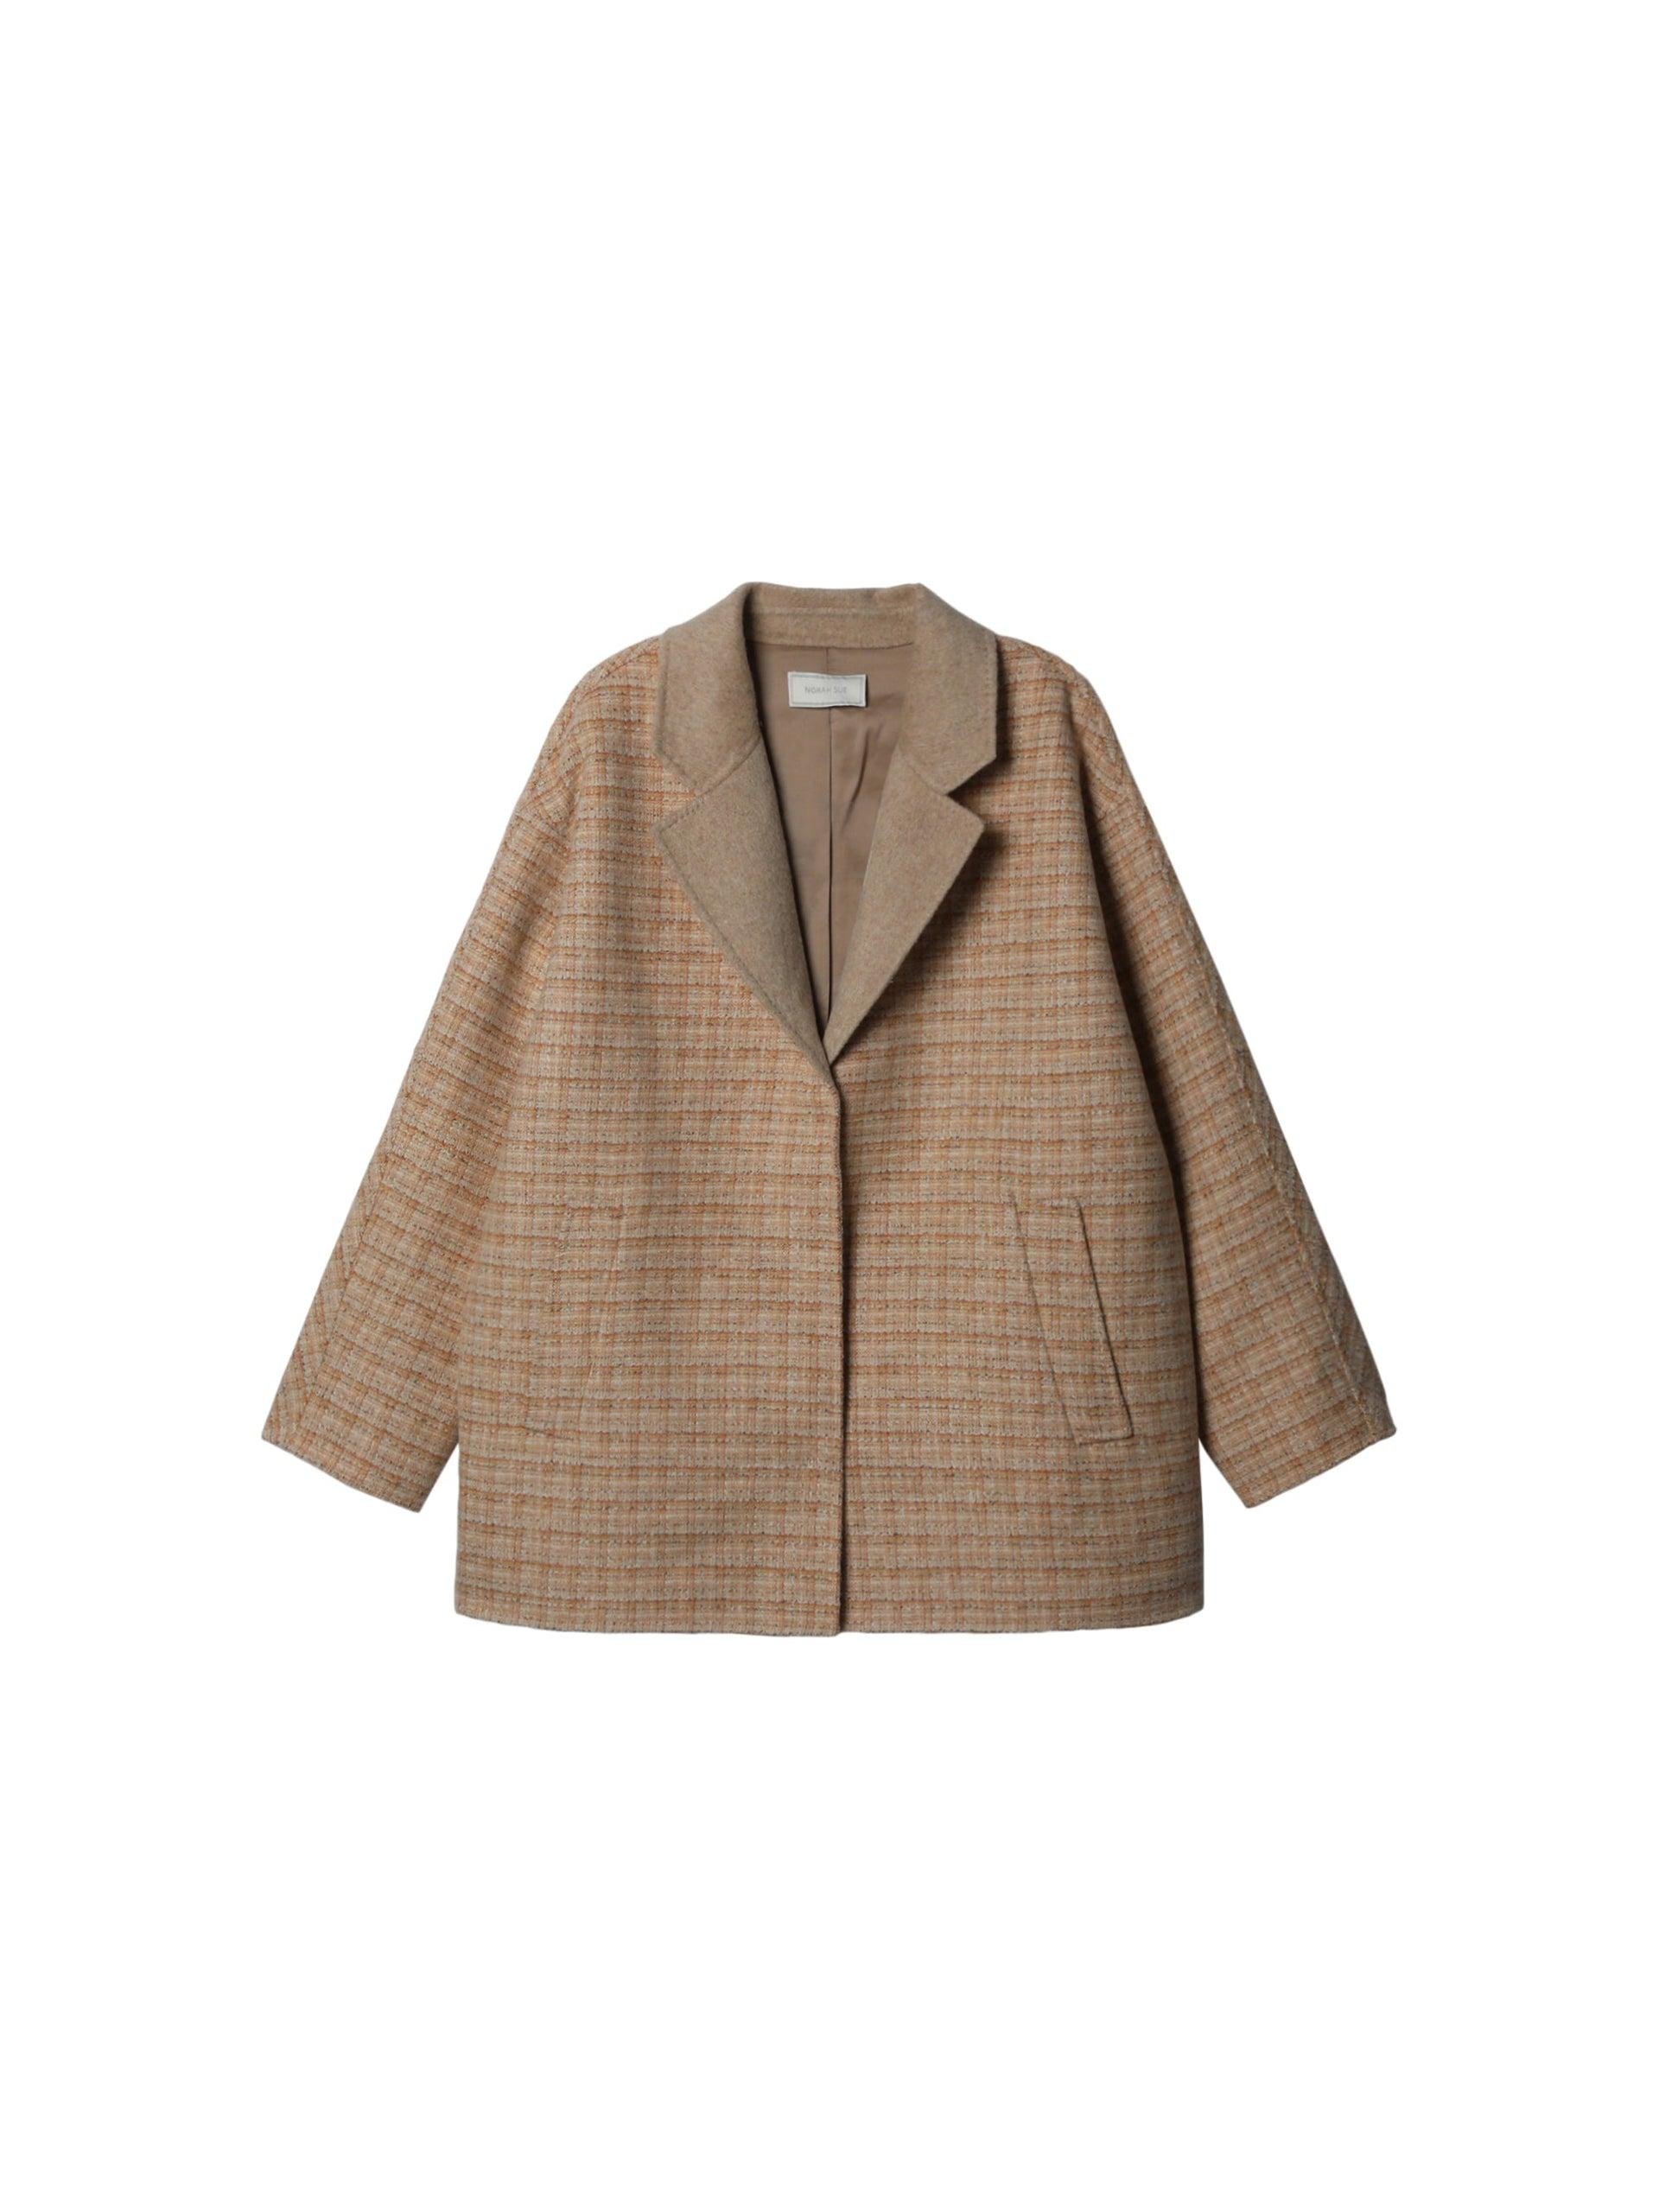 NORAH SUE Double Face Wool Blazer by COCKTAIL